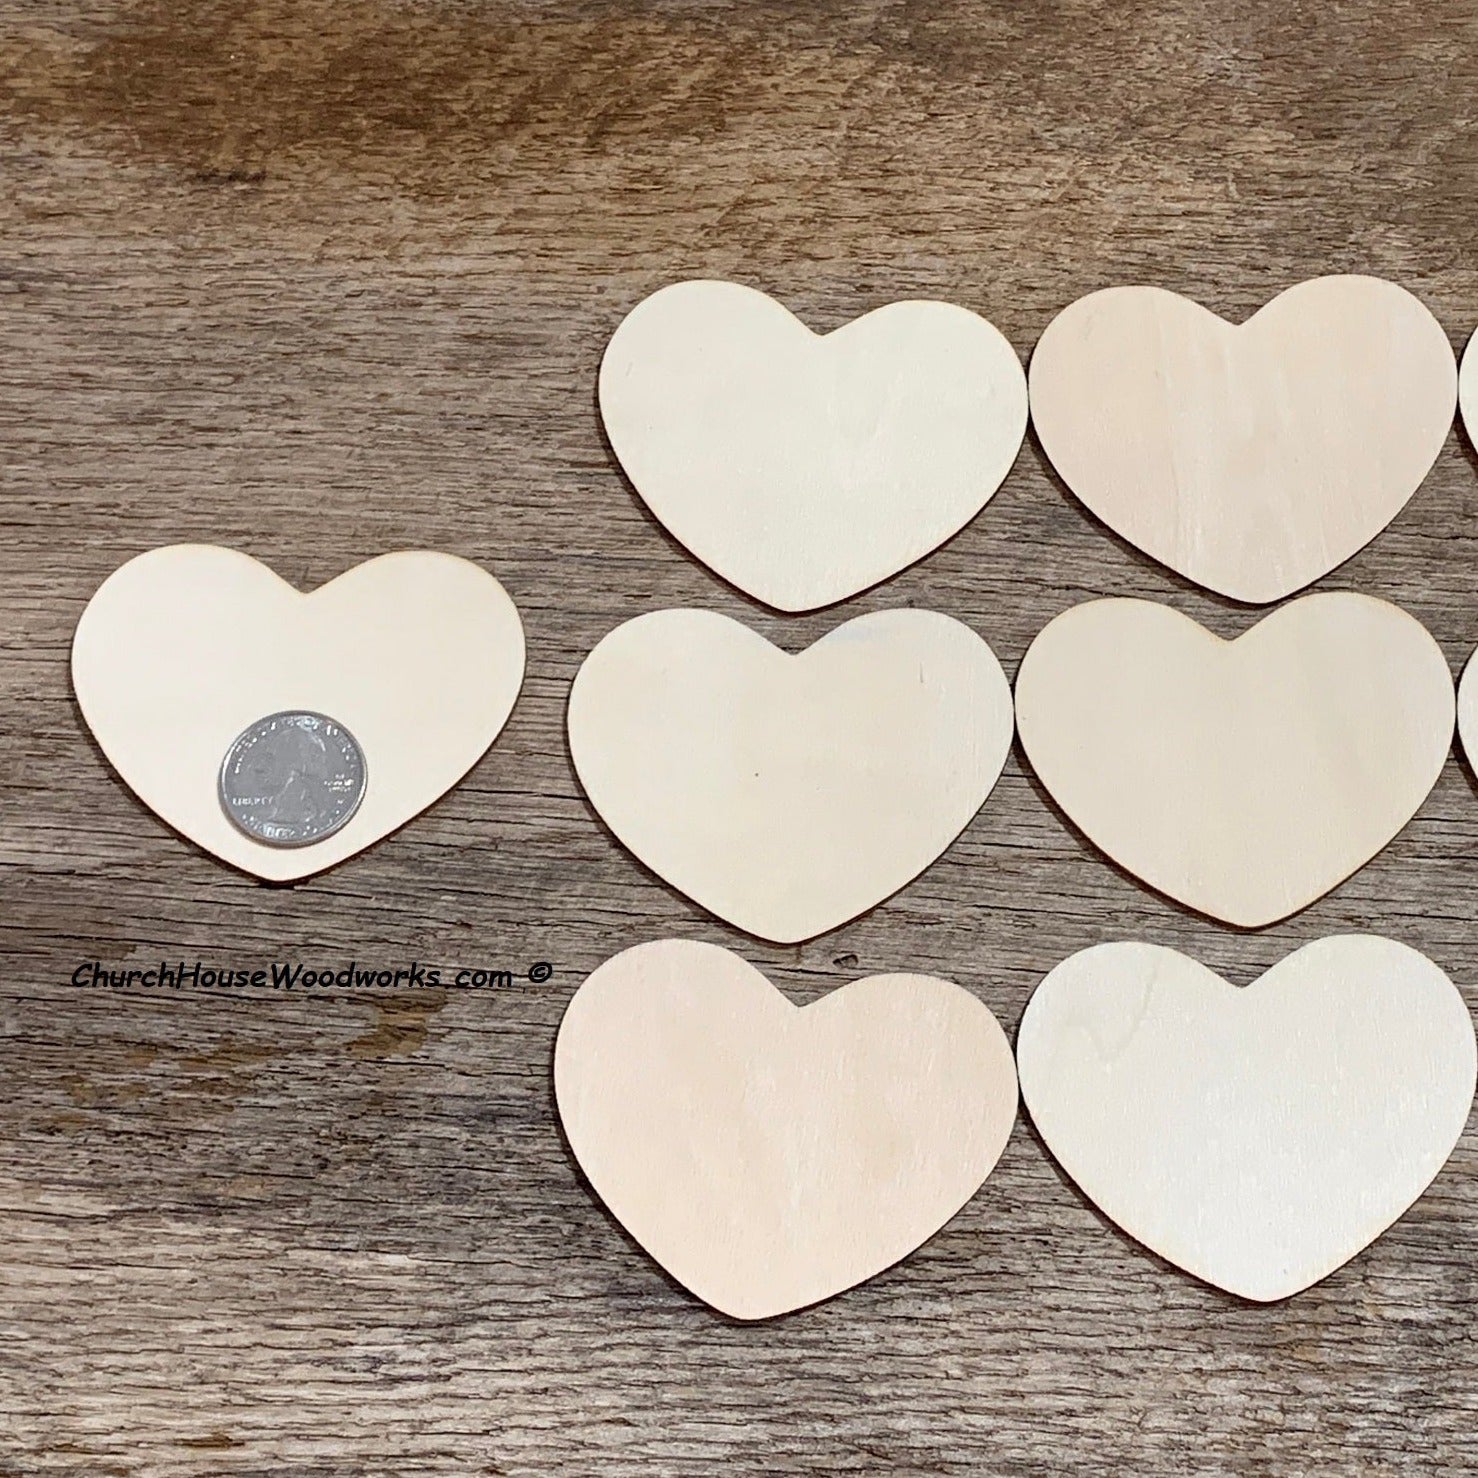 Blank Wood Hearts - 25 ct - 3 inch – Church House Woodworks